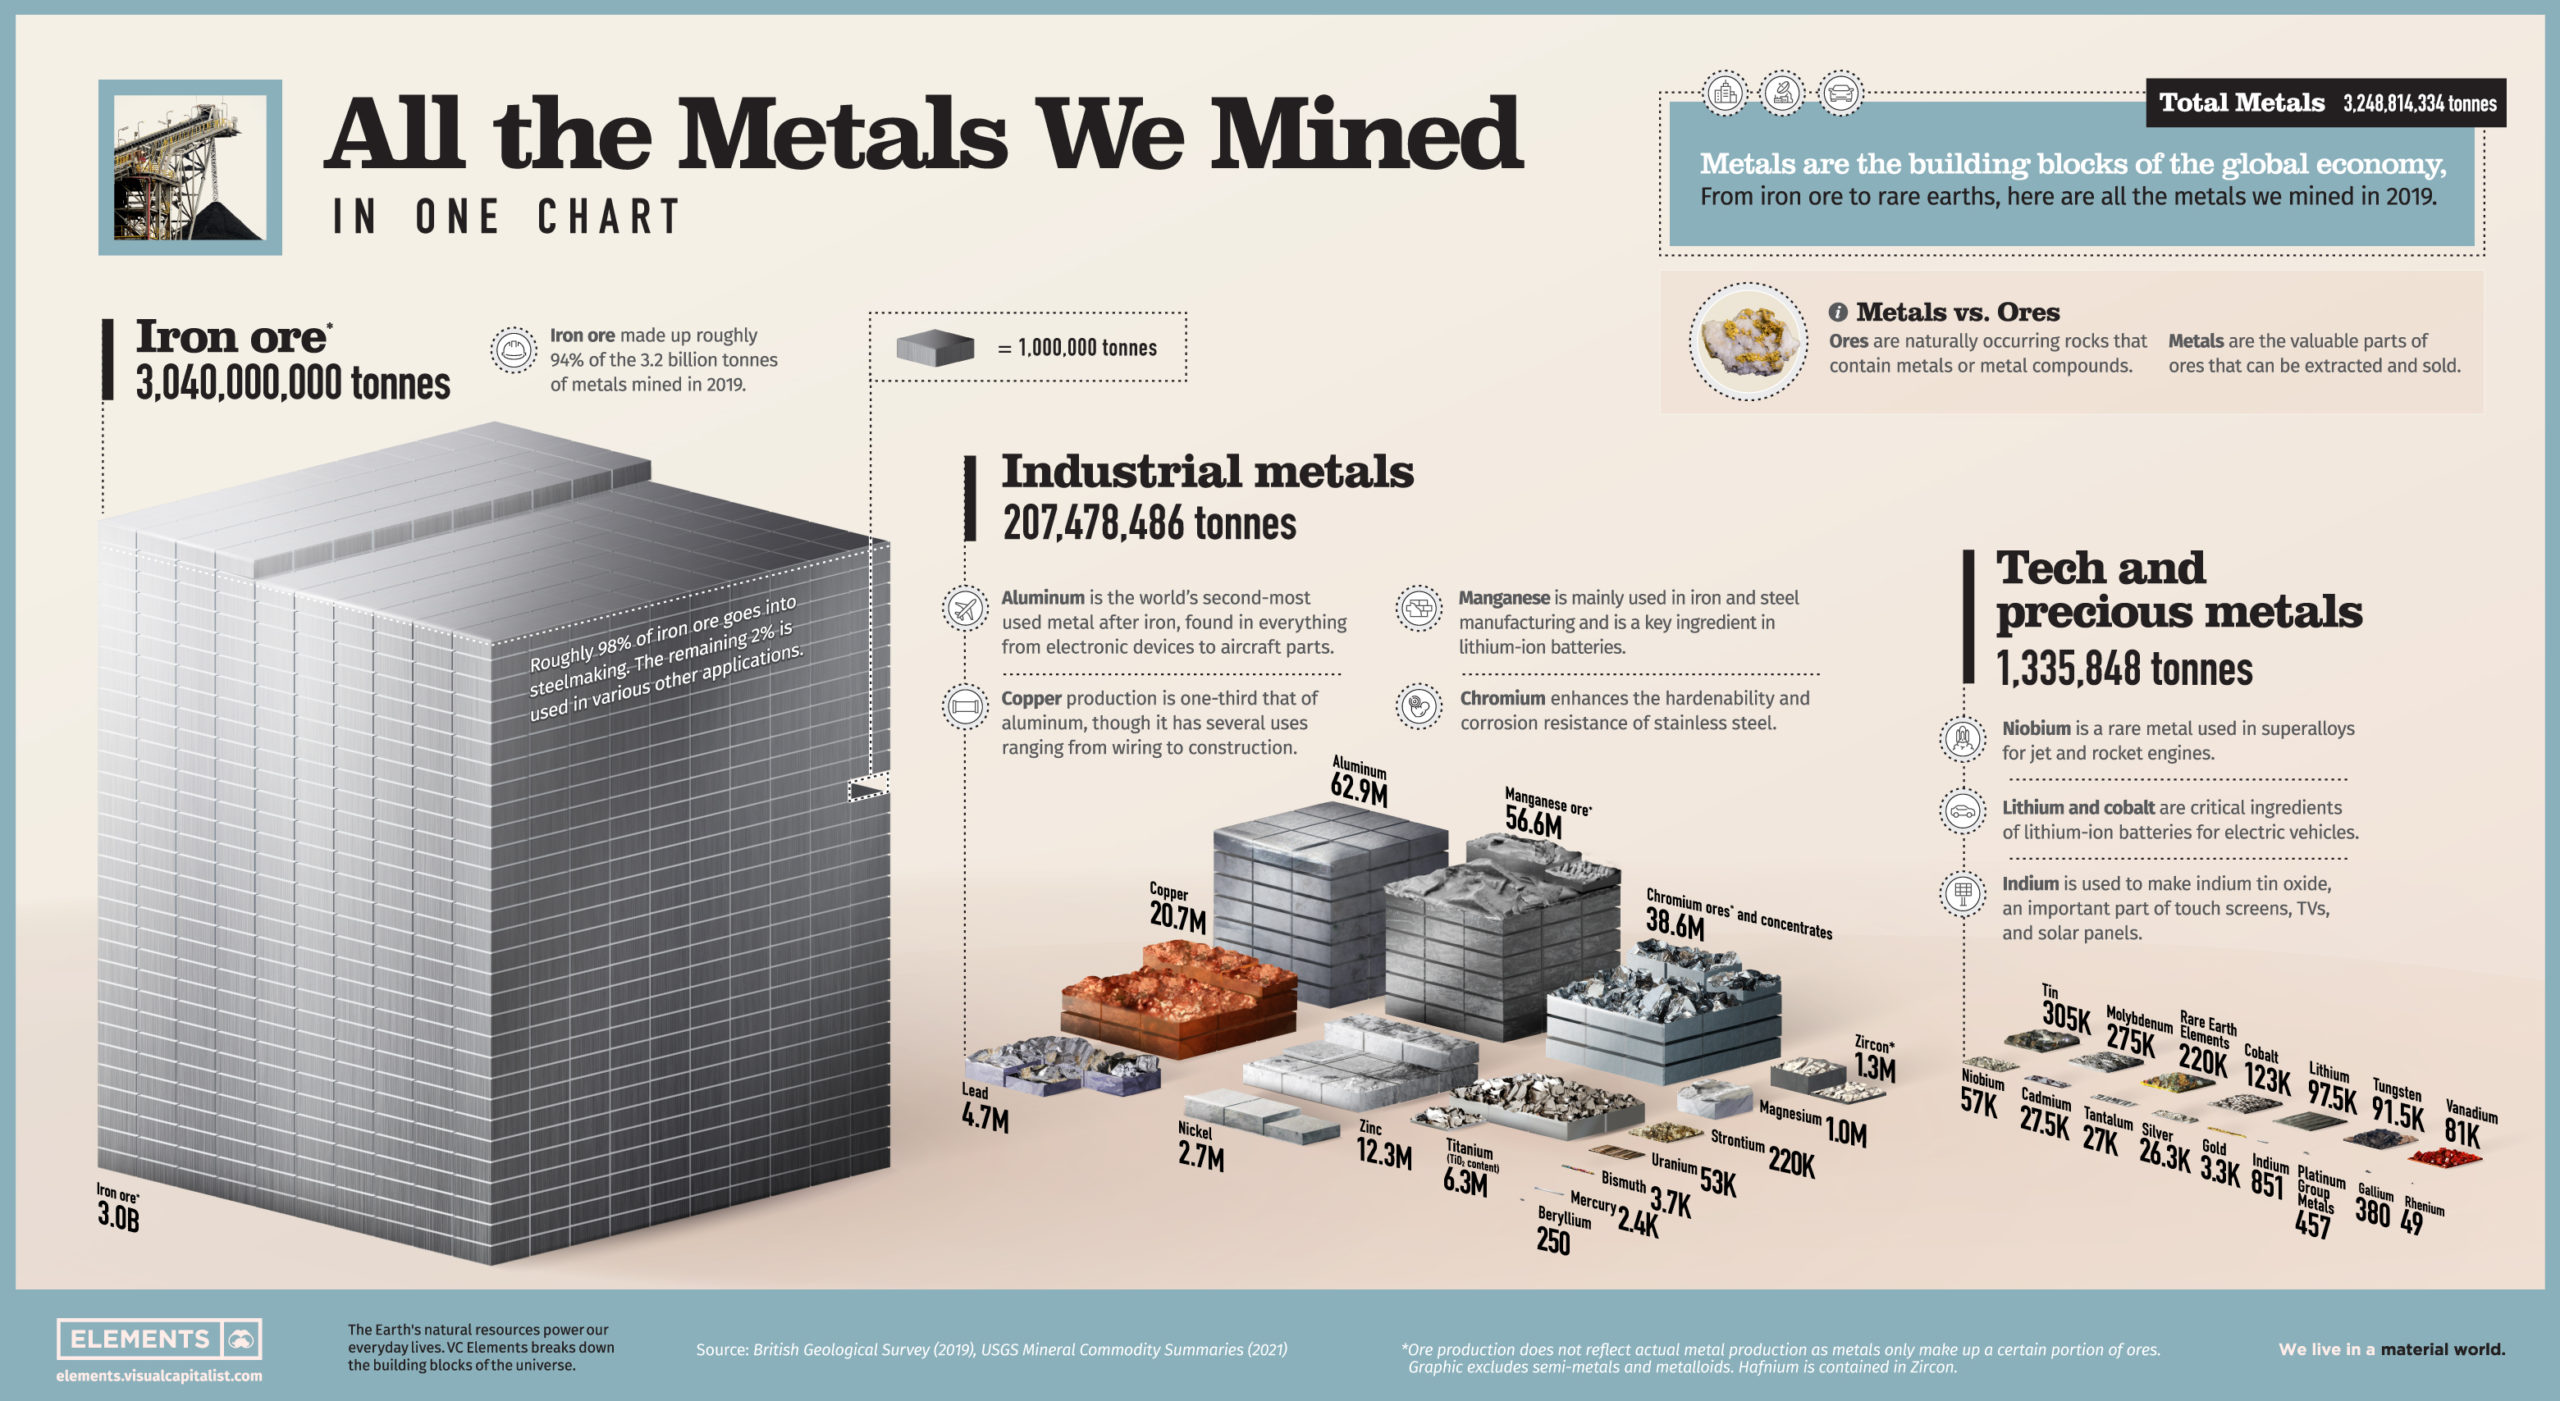 All-the-Metals-We-Mined-1-scaled.jpg